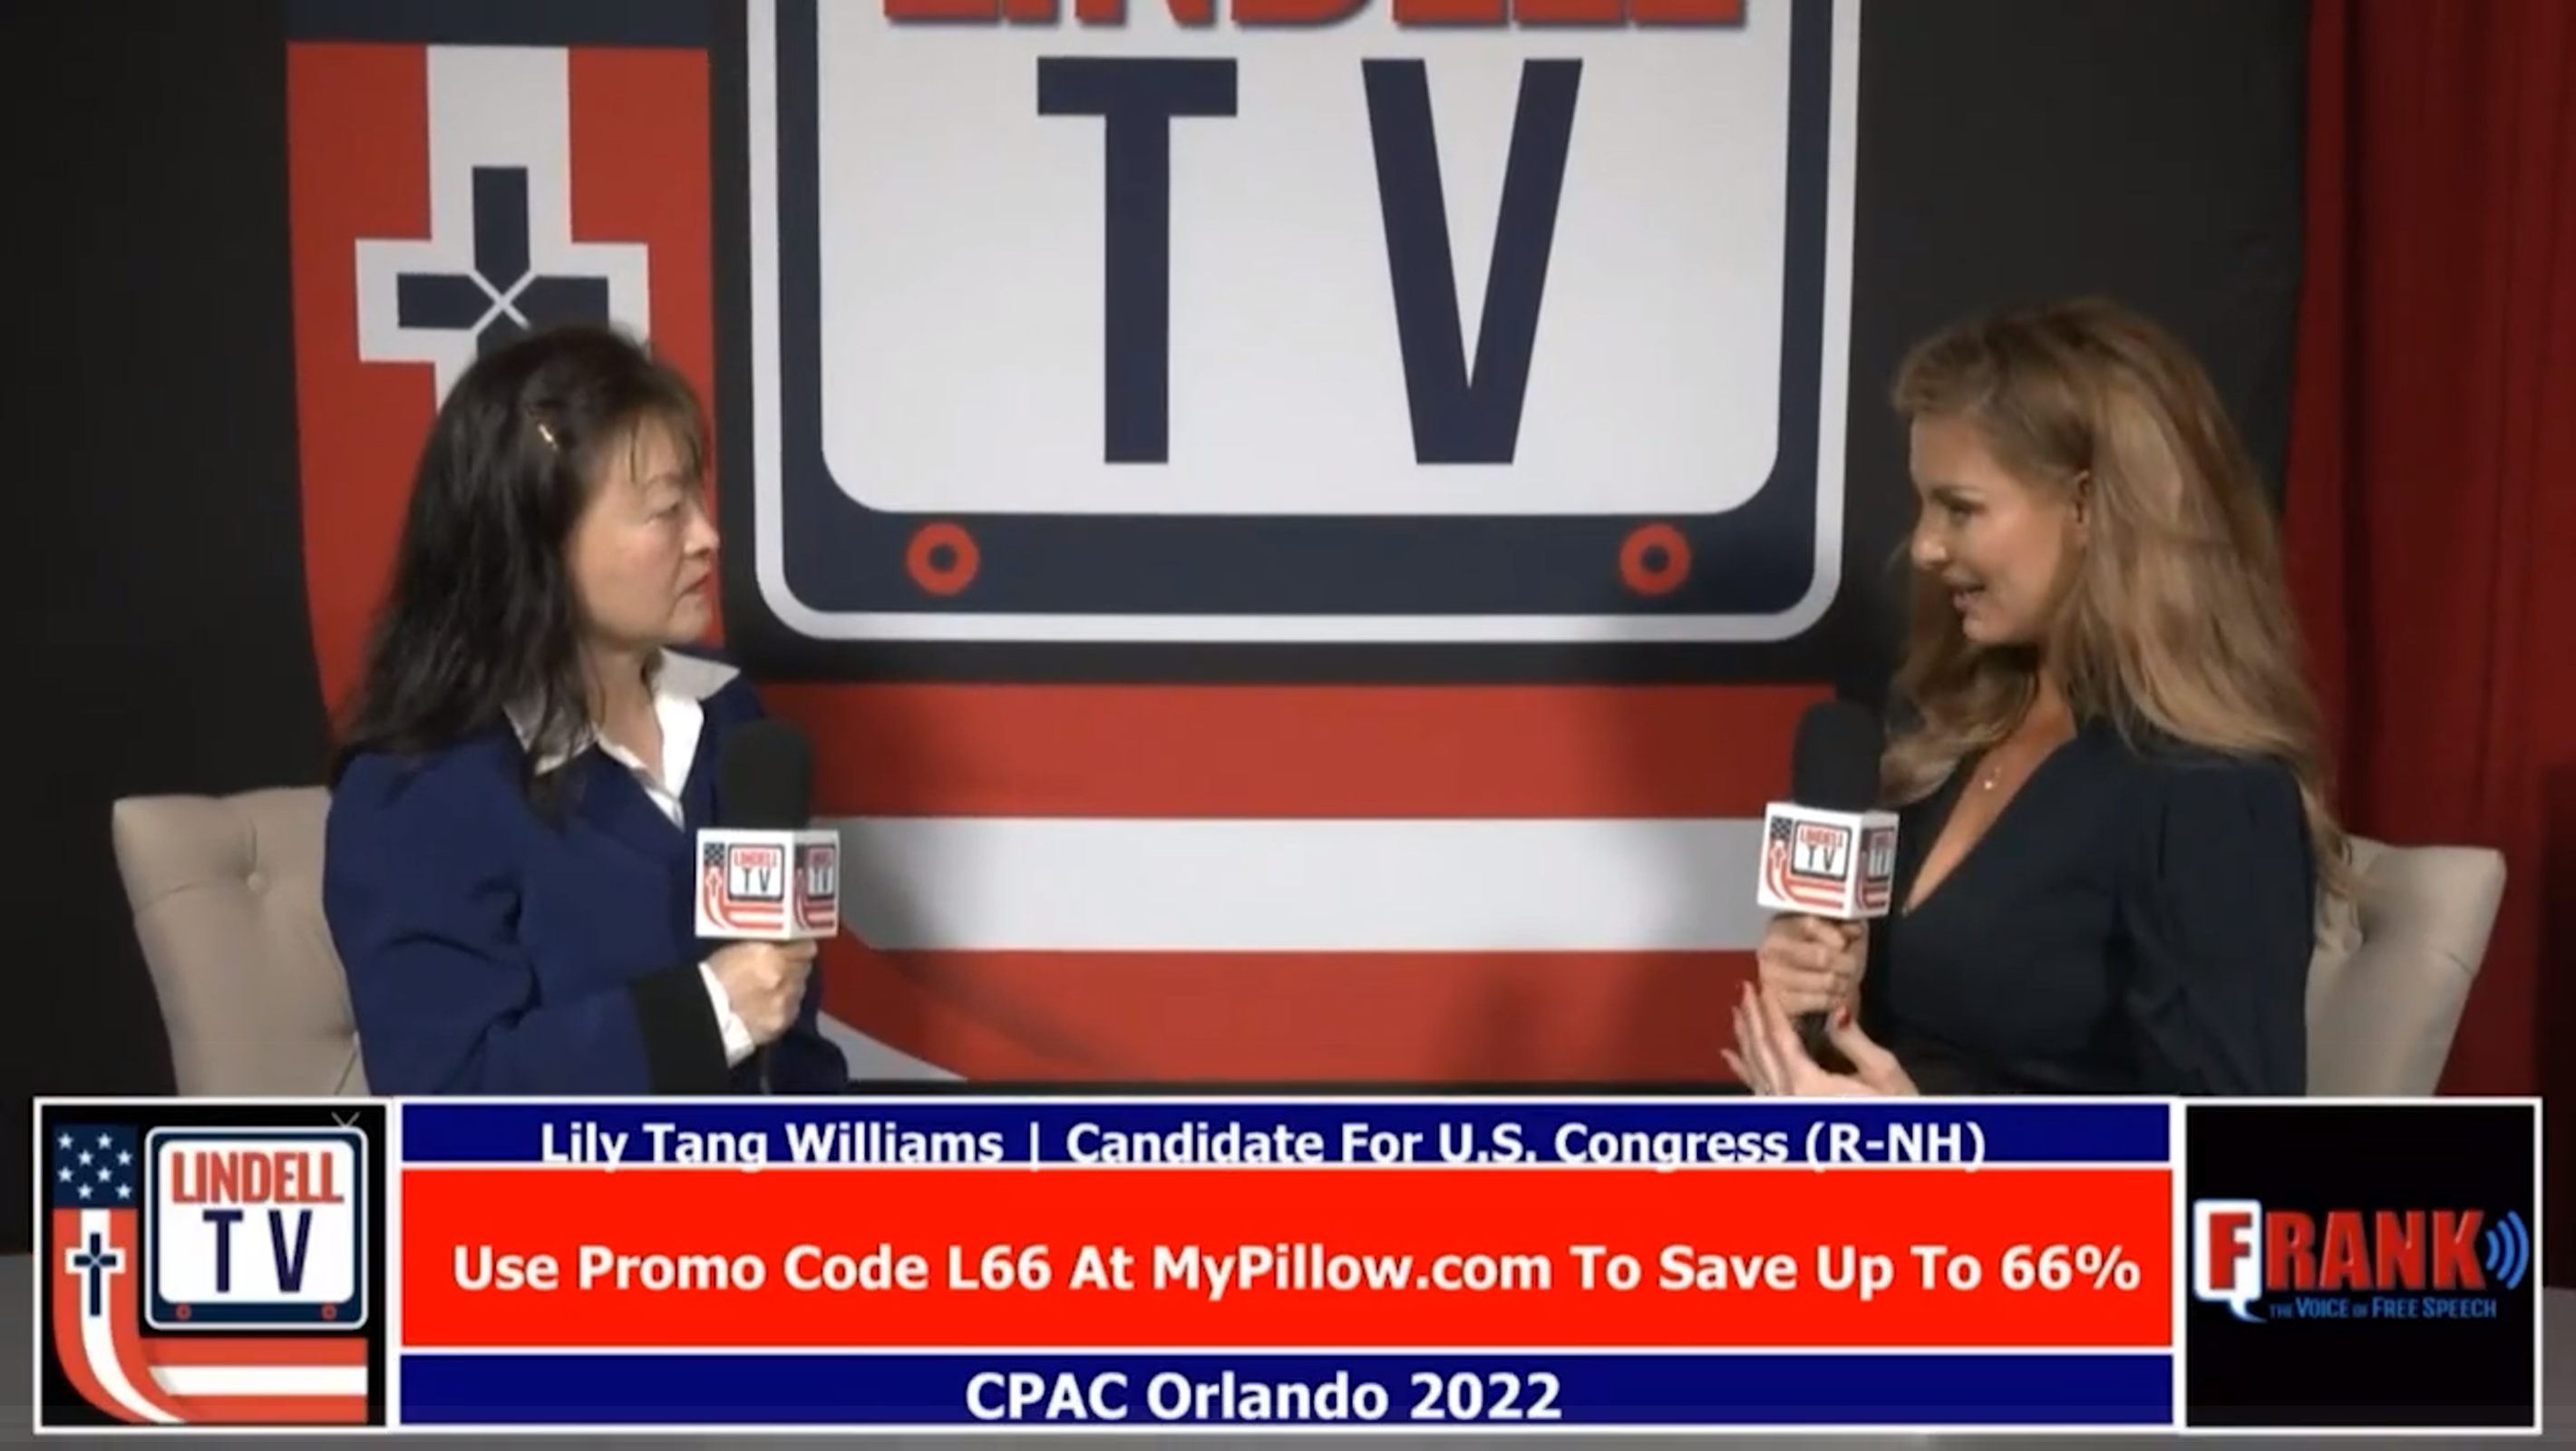 Lily Tang Williams interviewed by Emerald Robinson at CPAC 2022